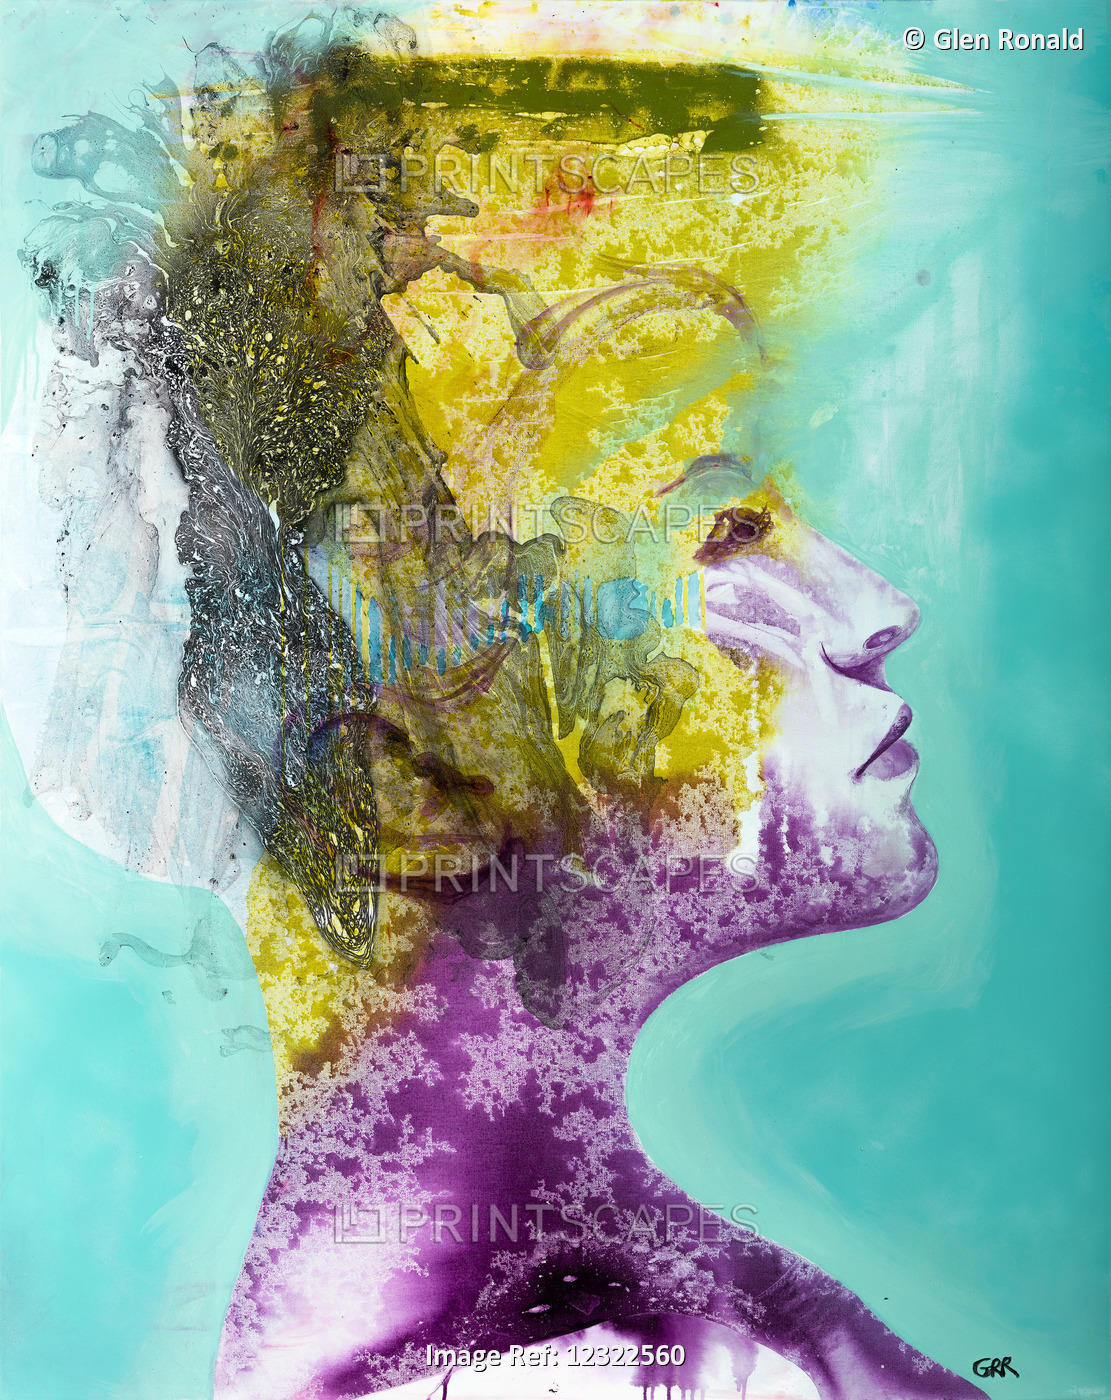 Beautiful Resolve, Colourful Artwork Of The Profile Of A Woman's Head And Neck